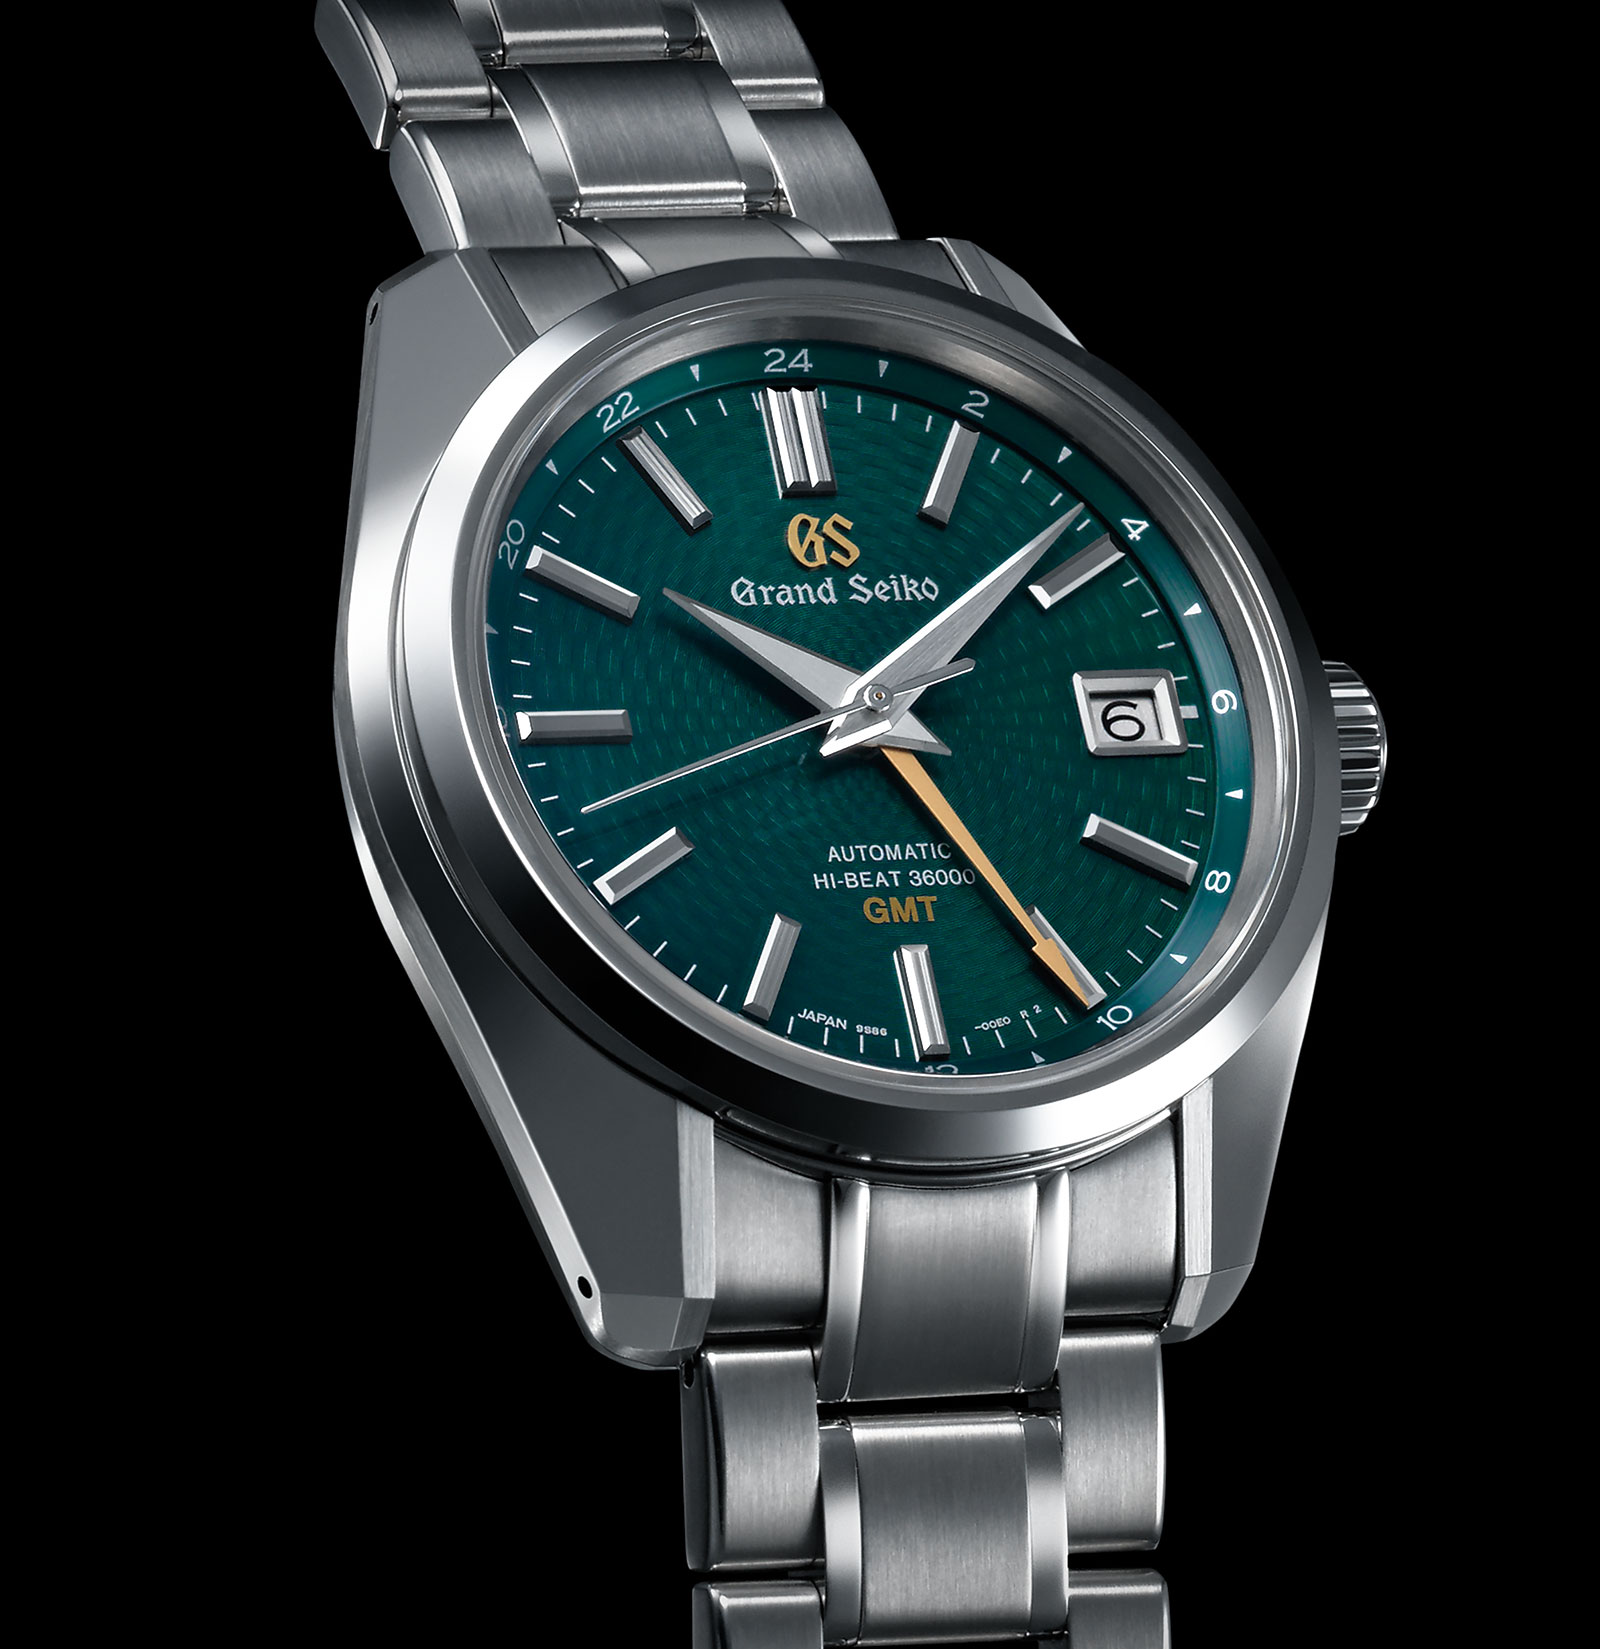 Introducing the Grand Seiko Hi-Beat GMT “Peacock” SBGJ227 A limited